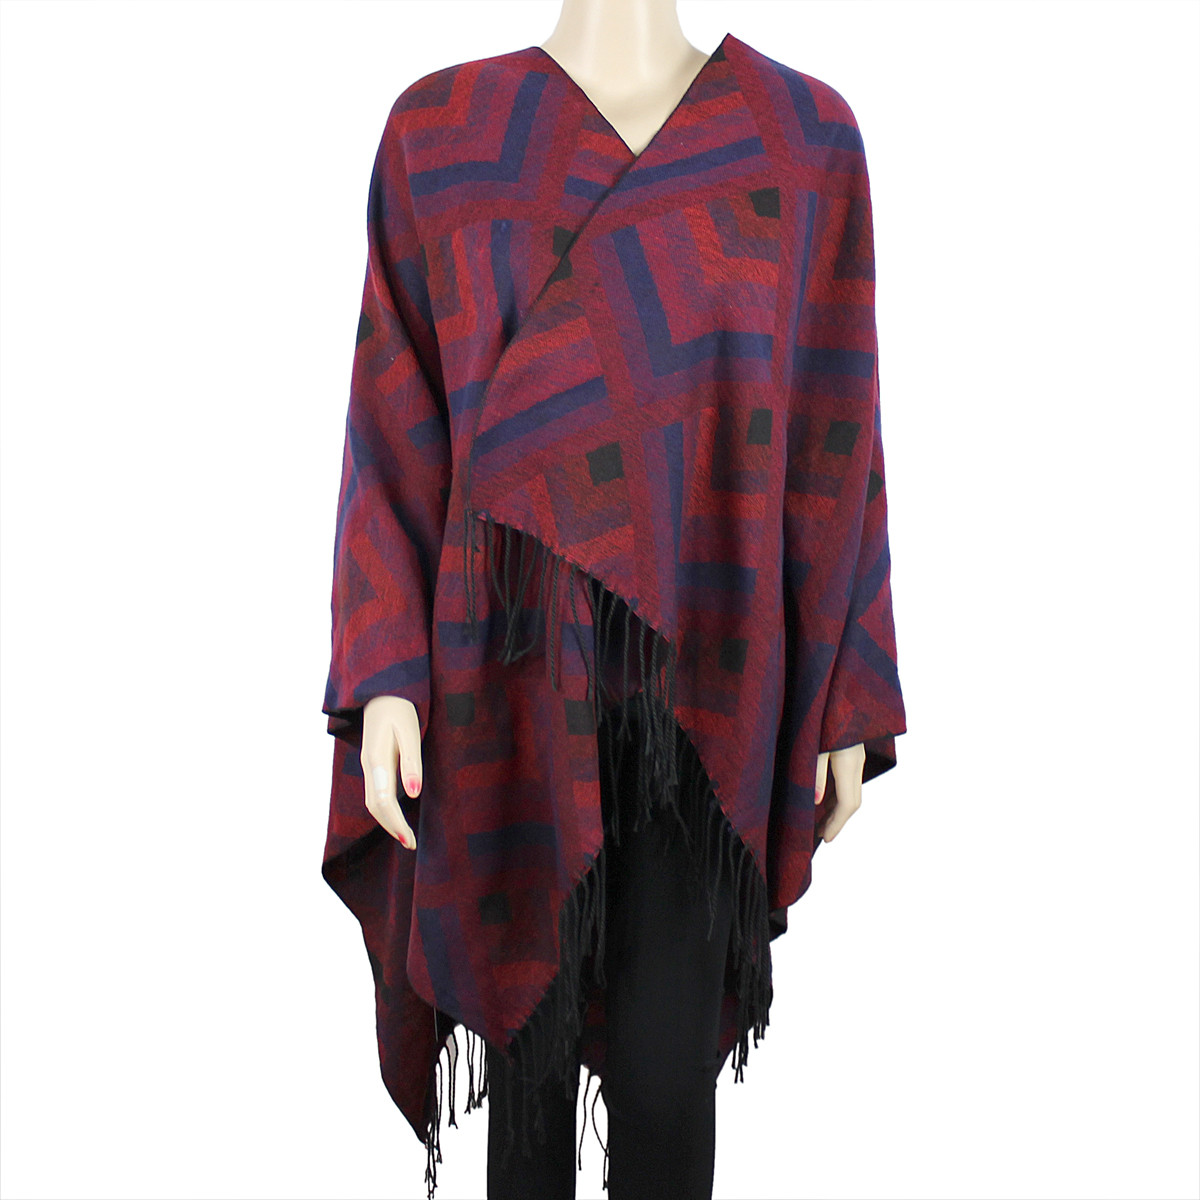 Tribal Arrows Open Front Fringed Ruana Wrap Burgundy and Navy ...